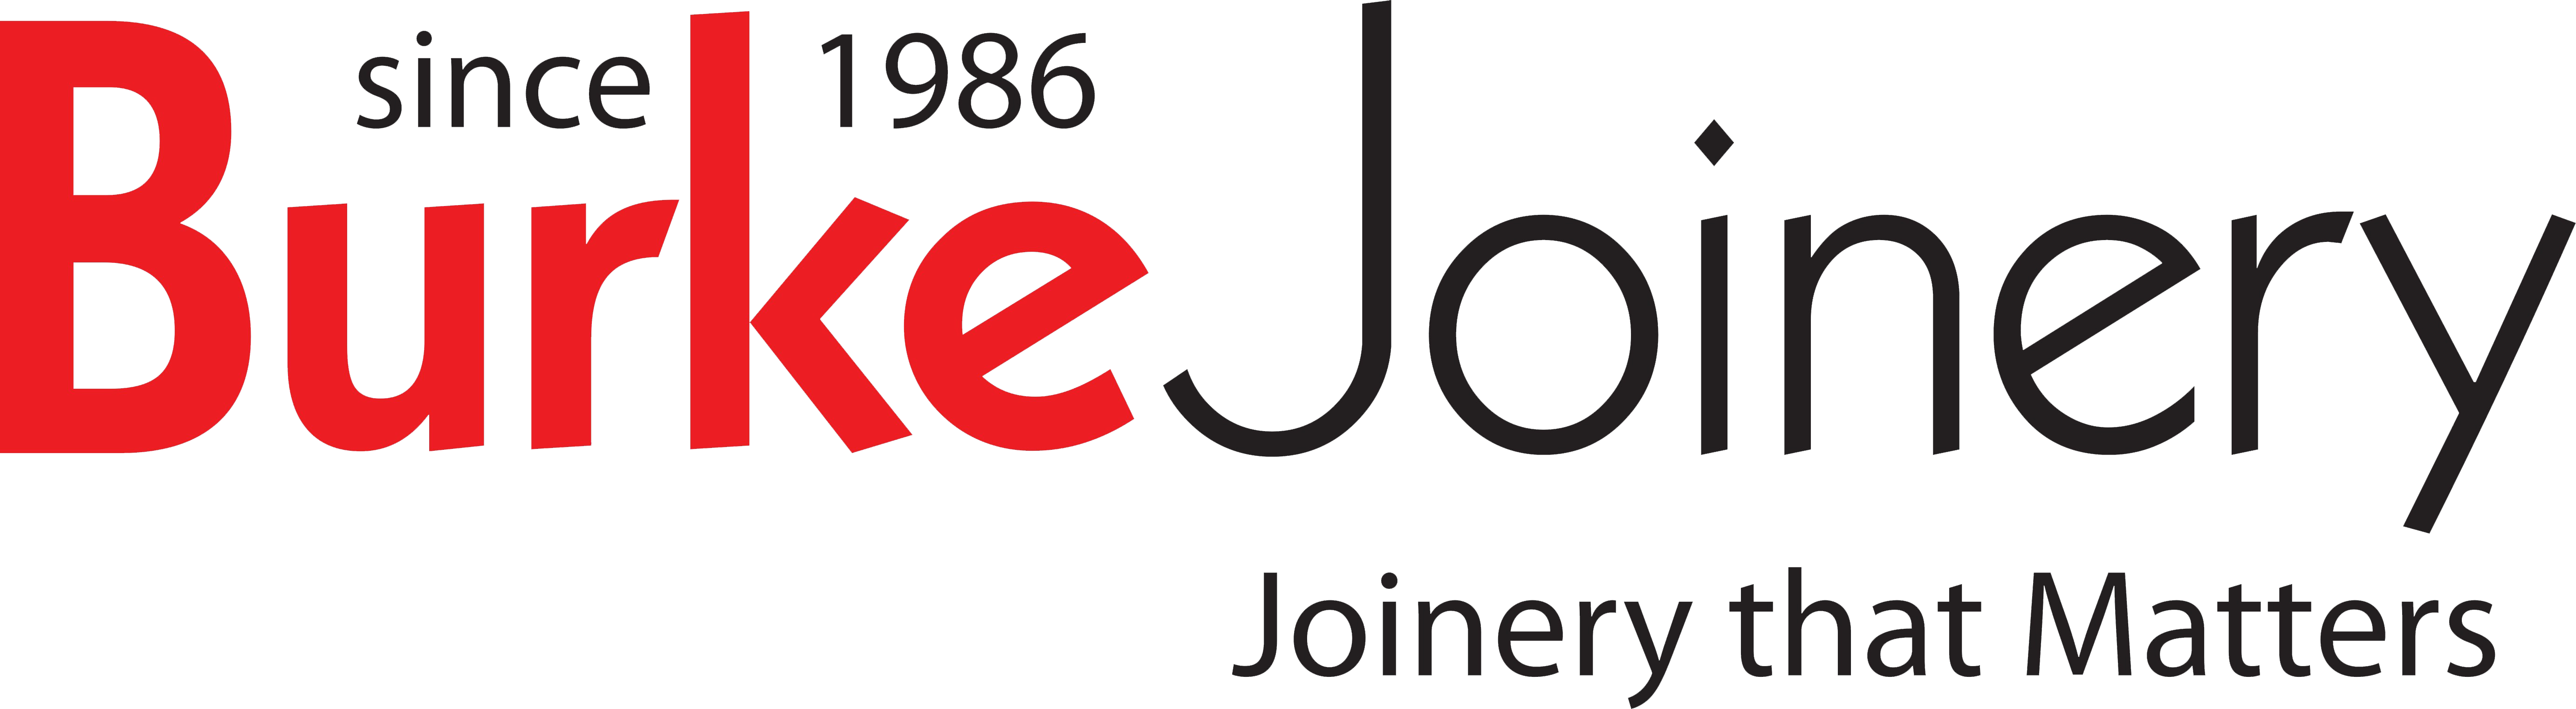 About Us - Burke Joinery Since 1986 - Joinery Suppliers